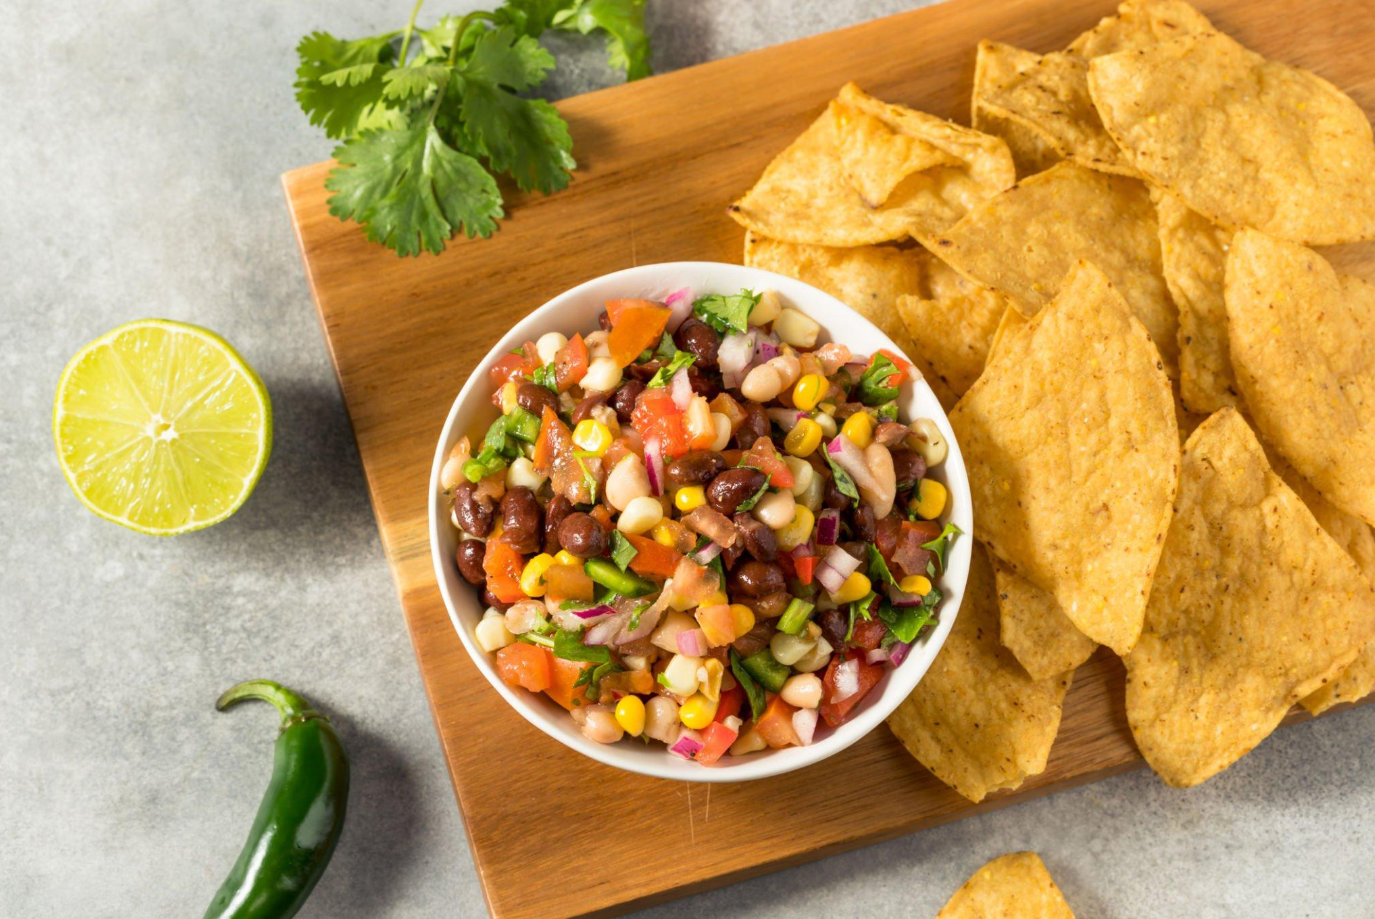 Step-by-step preparation of Chipotle Corn Salsa, showcasing chopping and mixing of ingredients.